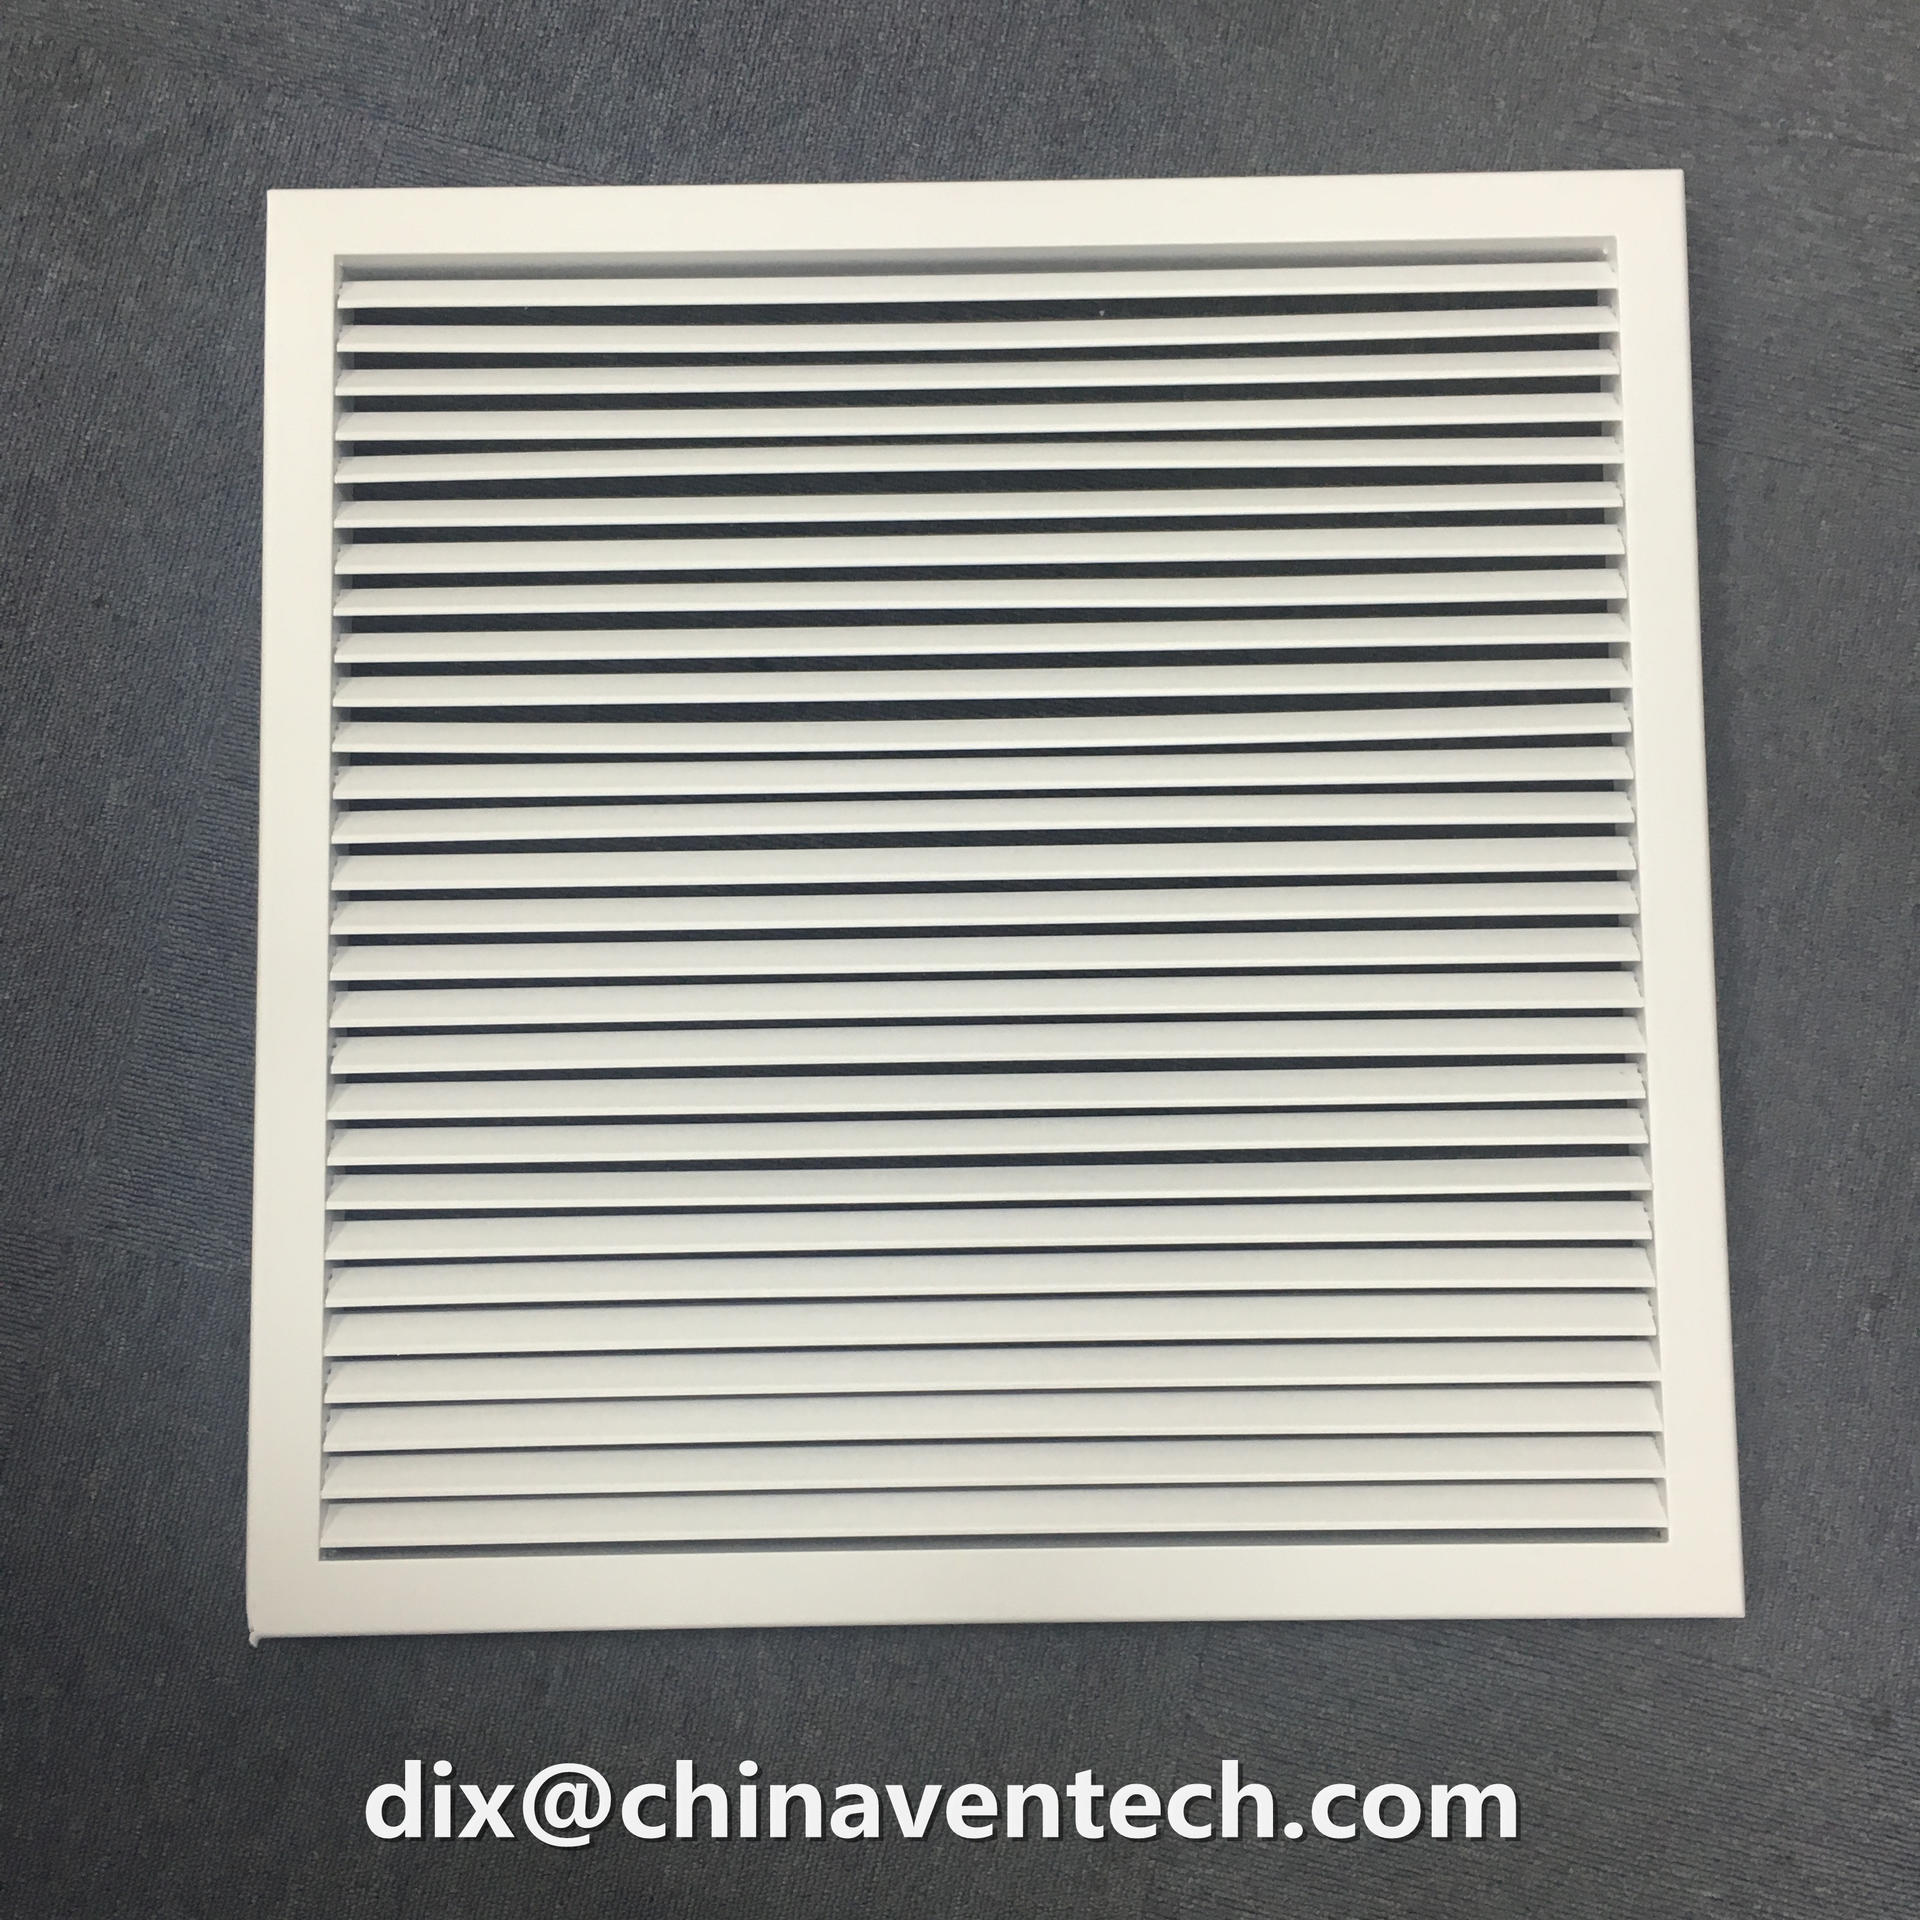 Hvac air conditioning duct insulation vent cover exhaust grille diffuser